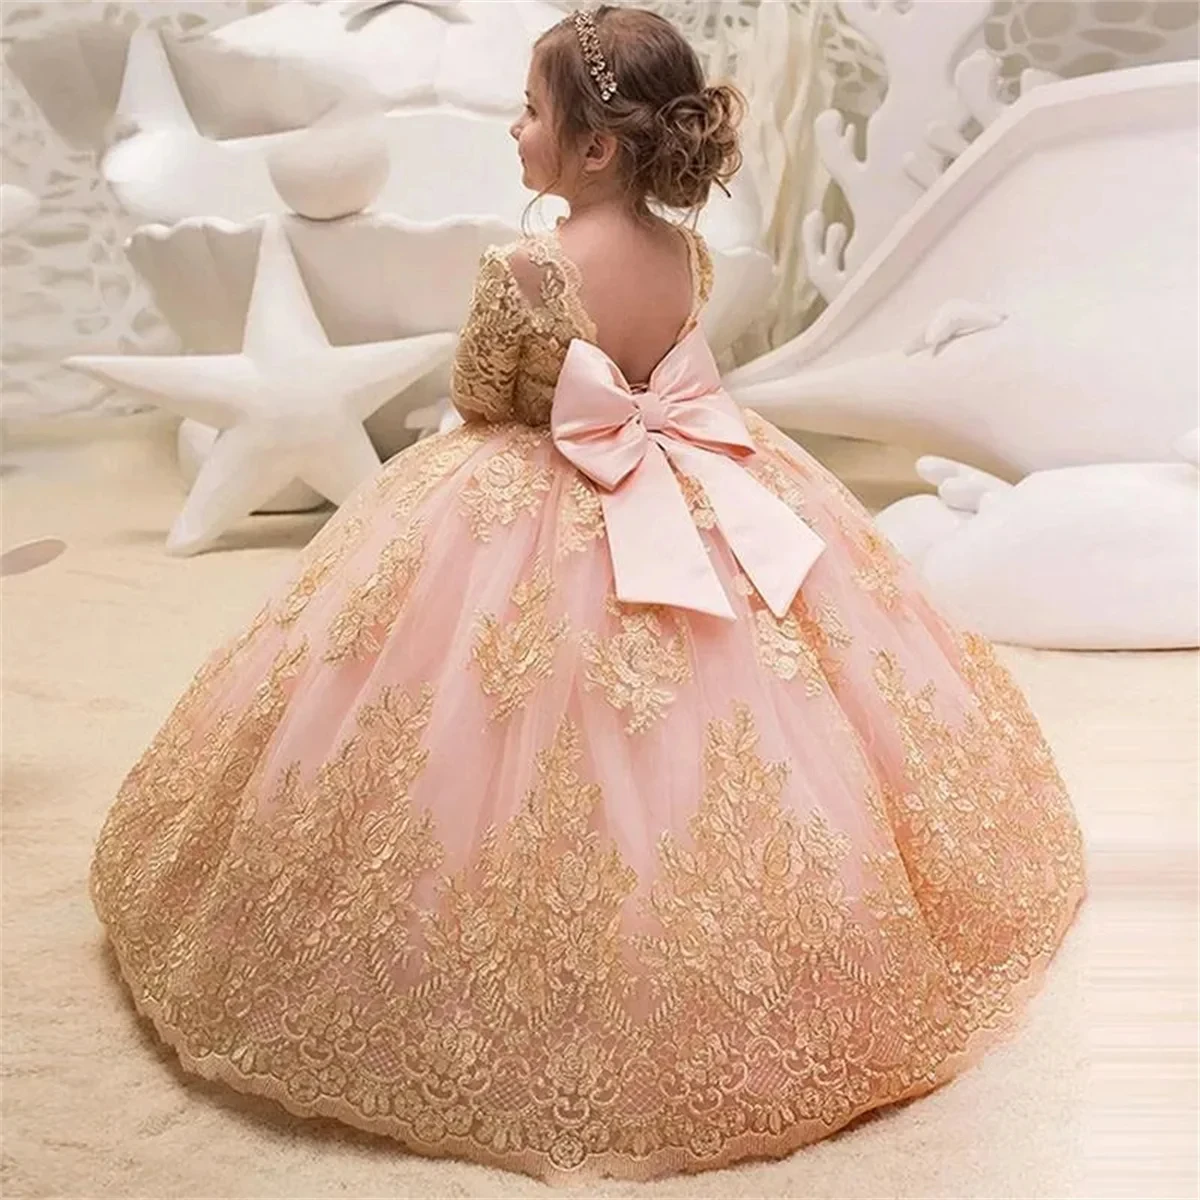 

Luxury Champagne Gold Flower Girl Dress Lace Pink Bow Tulle Puffy Baby Dresses For Wedding First Communion Birthday Ball Gown